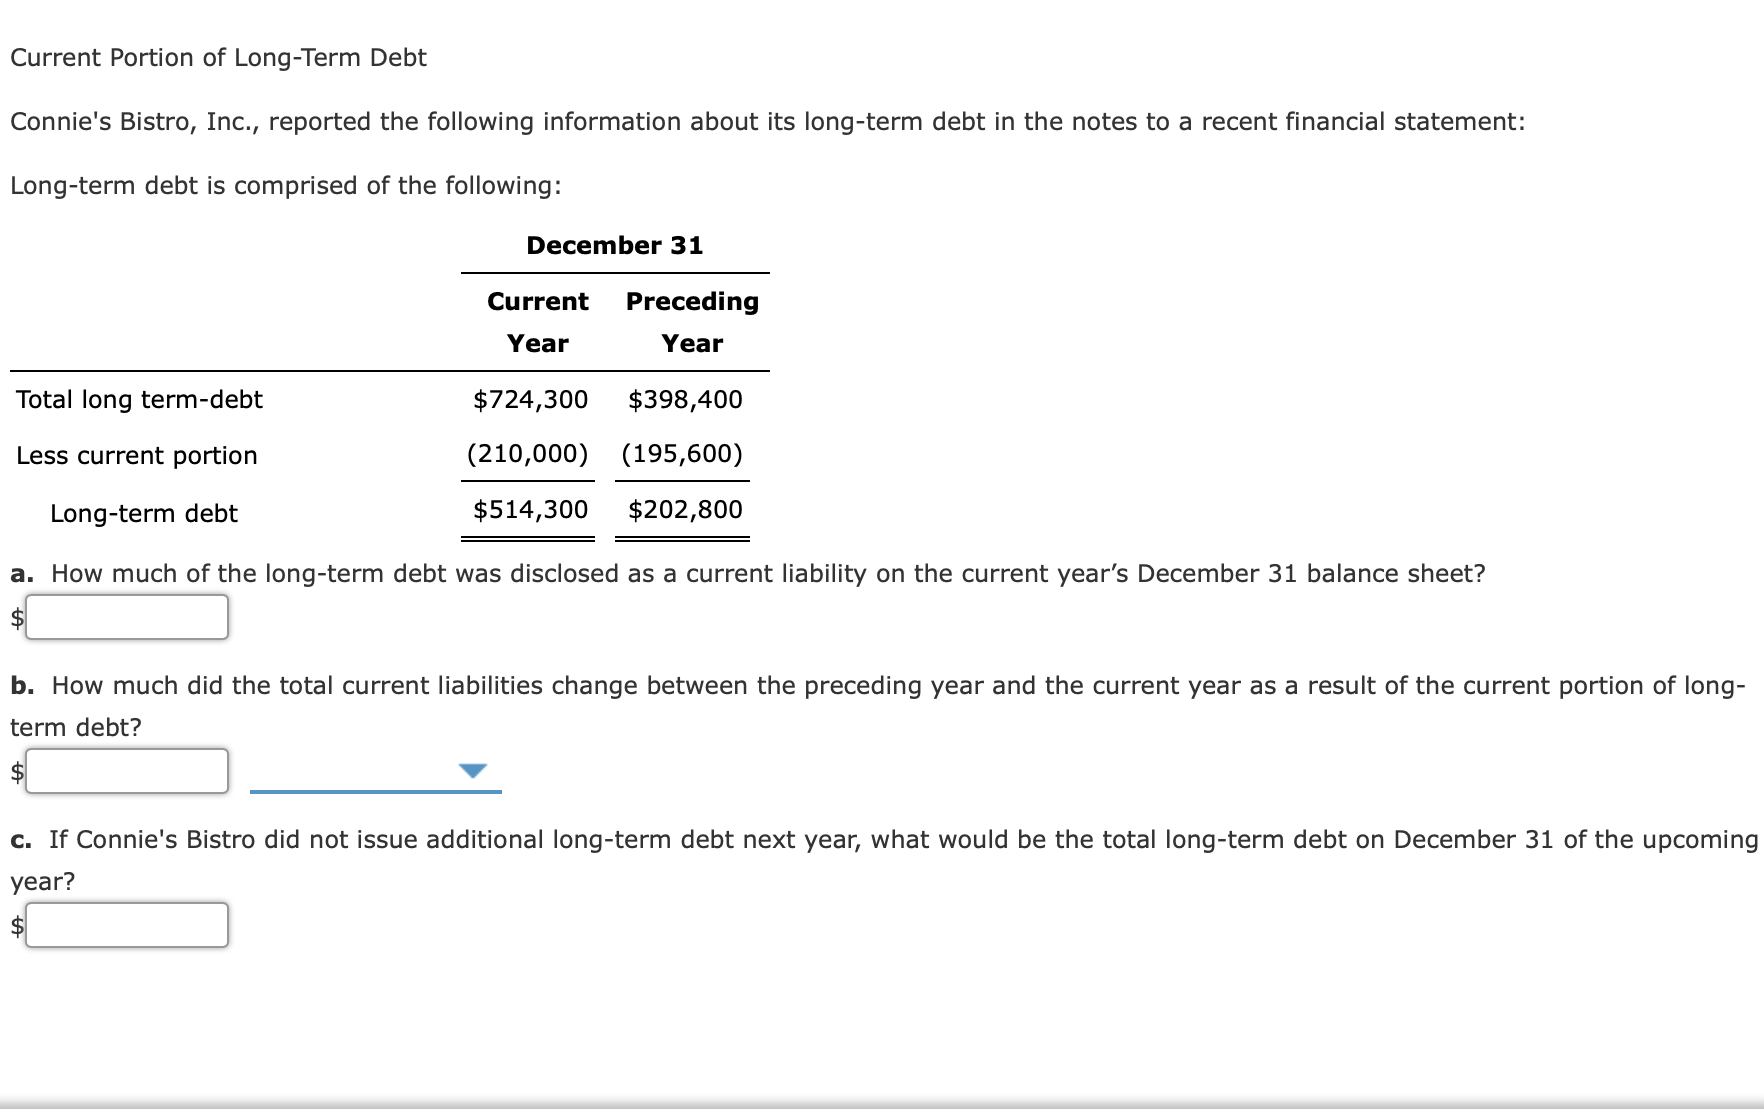 Current Portion of Long-Term Debt
Connie's Bistro, Inc., reported the following information about its long-term debt in the notes to a recent financial statement:
Long-term debt is comprised of the following:
December 31
Current
Preceding
Year
Year
Total long term-debt
$724,300
$398,400
Less current portion
(210,000) (195,600)
Long-term debt
$514,300
$202,800
a. How much of the long-term debt was disclosed as a current liability on the current year's December 31 balance sheet?
$4
b. How much did the total current liabilities change between the preceding year and the current year as a result of the current portion of long-
term debt?
$4
c. If Connie's Bistro did not issue additional long-term debt next year, what would be the total long-term debt on December 31 of the upcomin
year?
$
